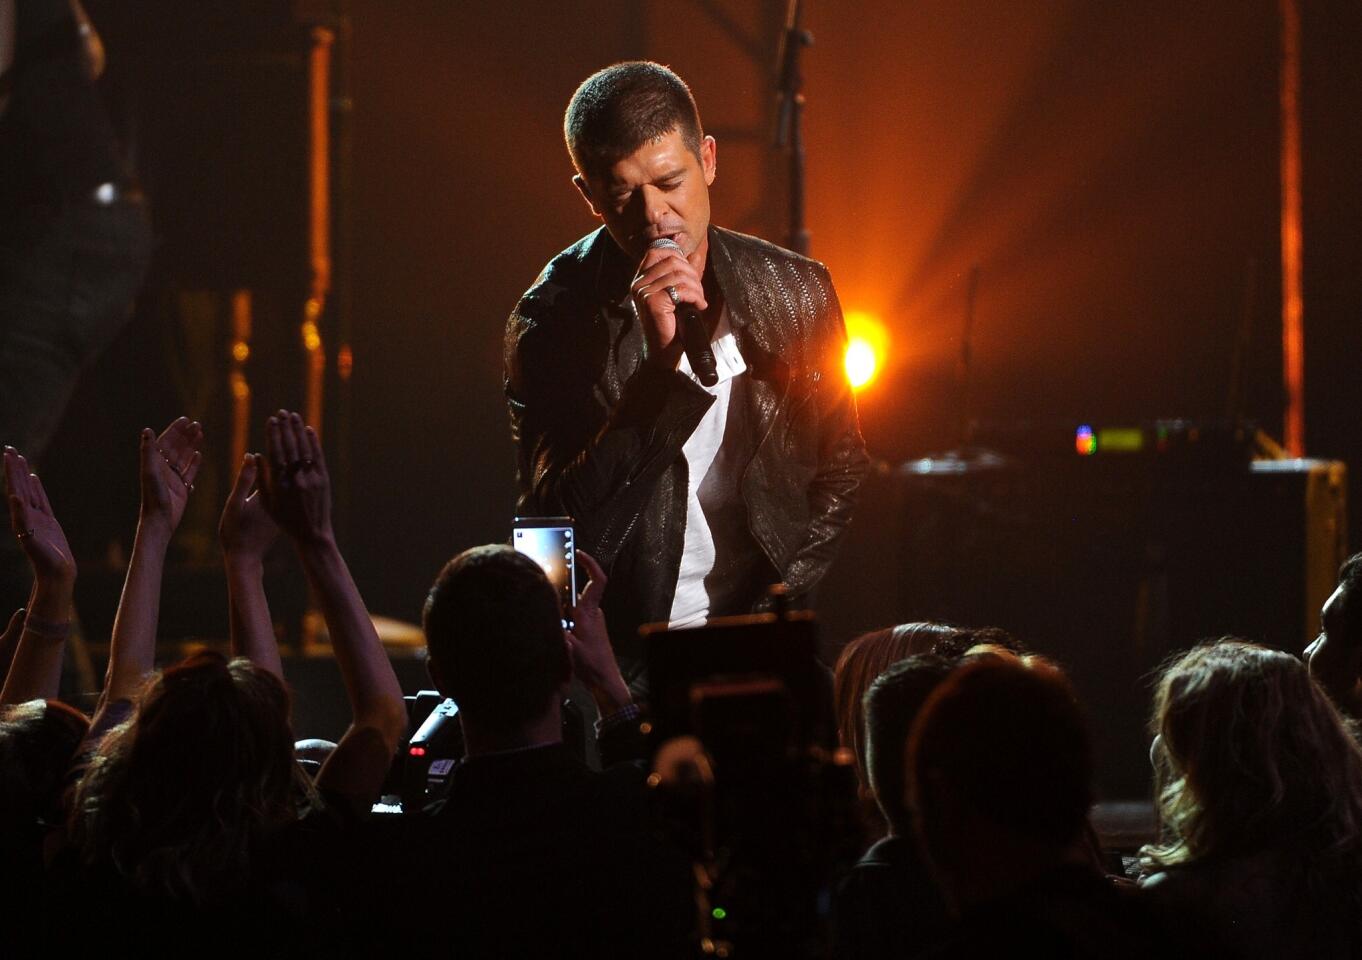 Robin Thicke names newest album after estranged wife